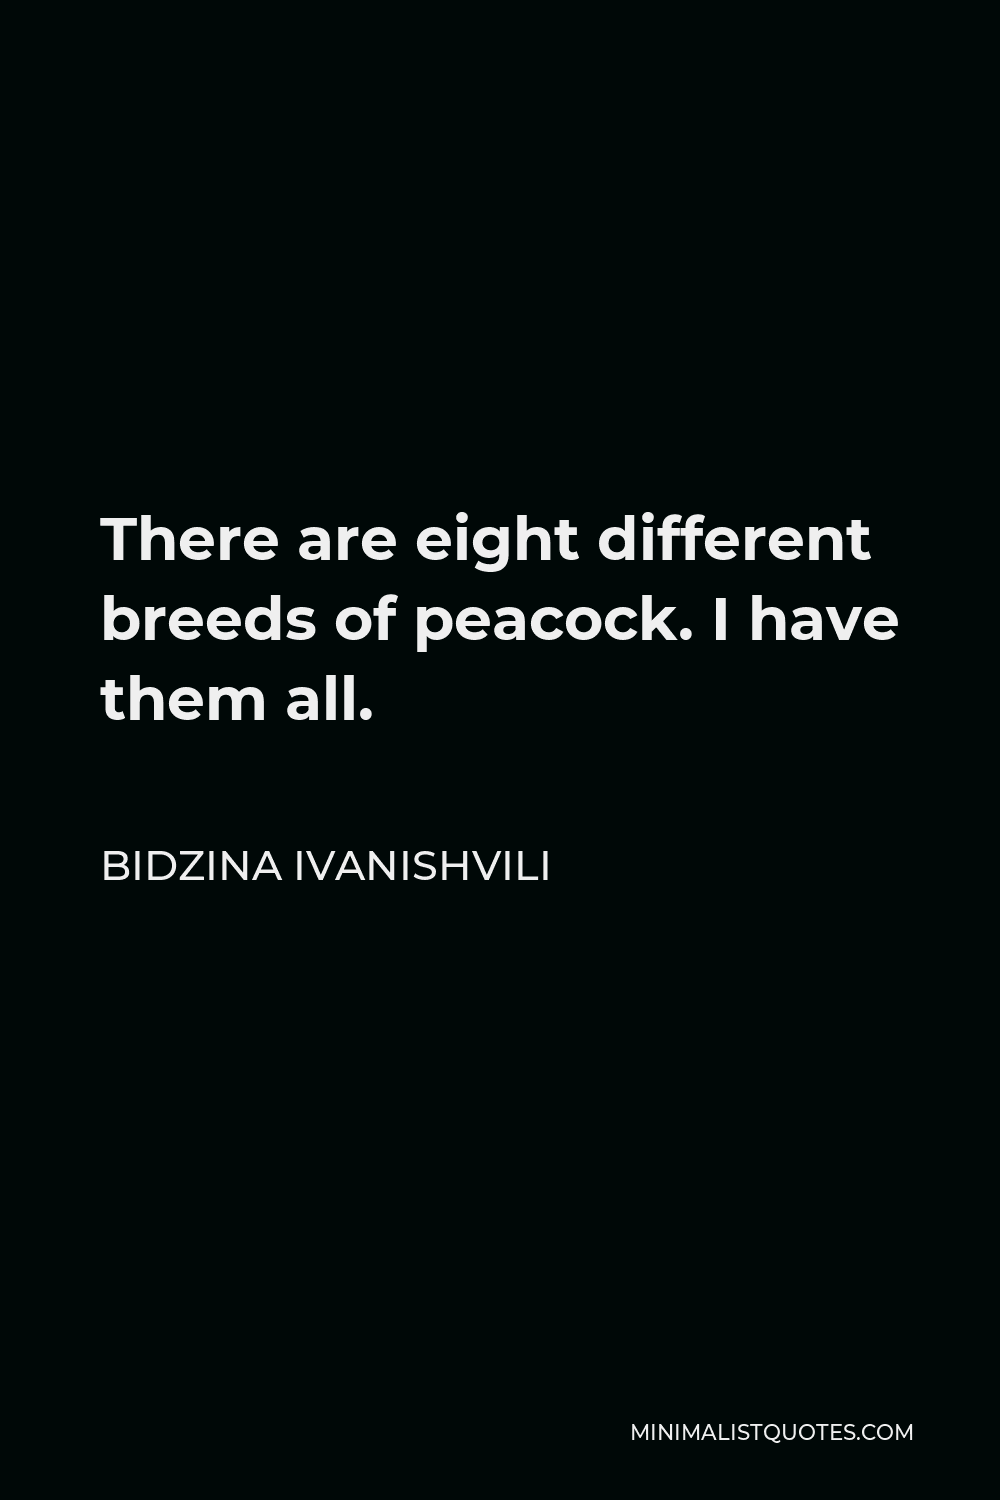 Bidzina Ivanishvili Quote - There are eight different breeds of peacock. I have them all.